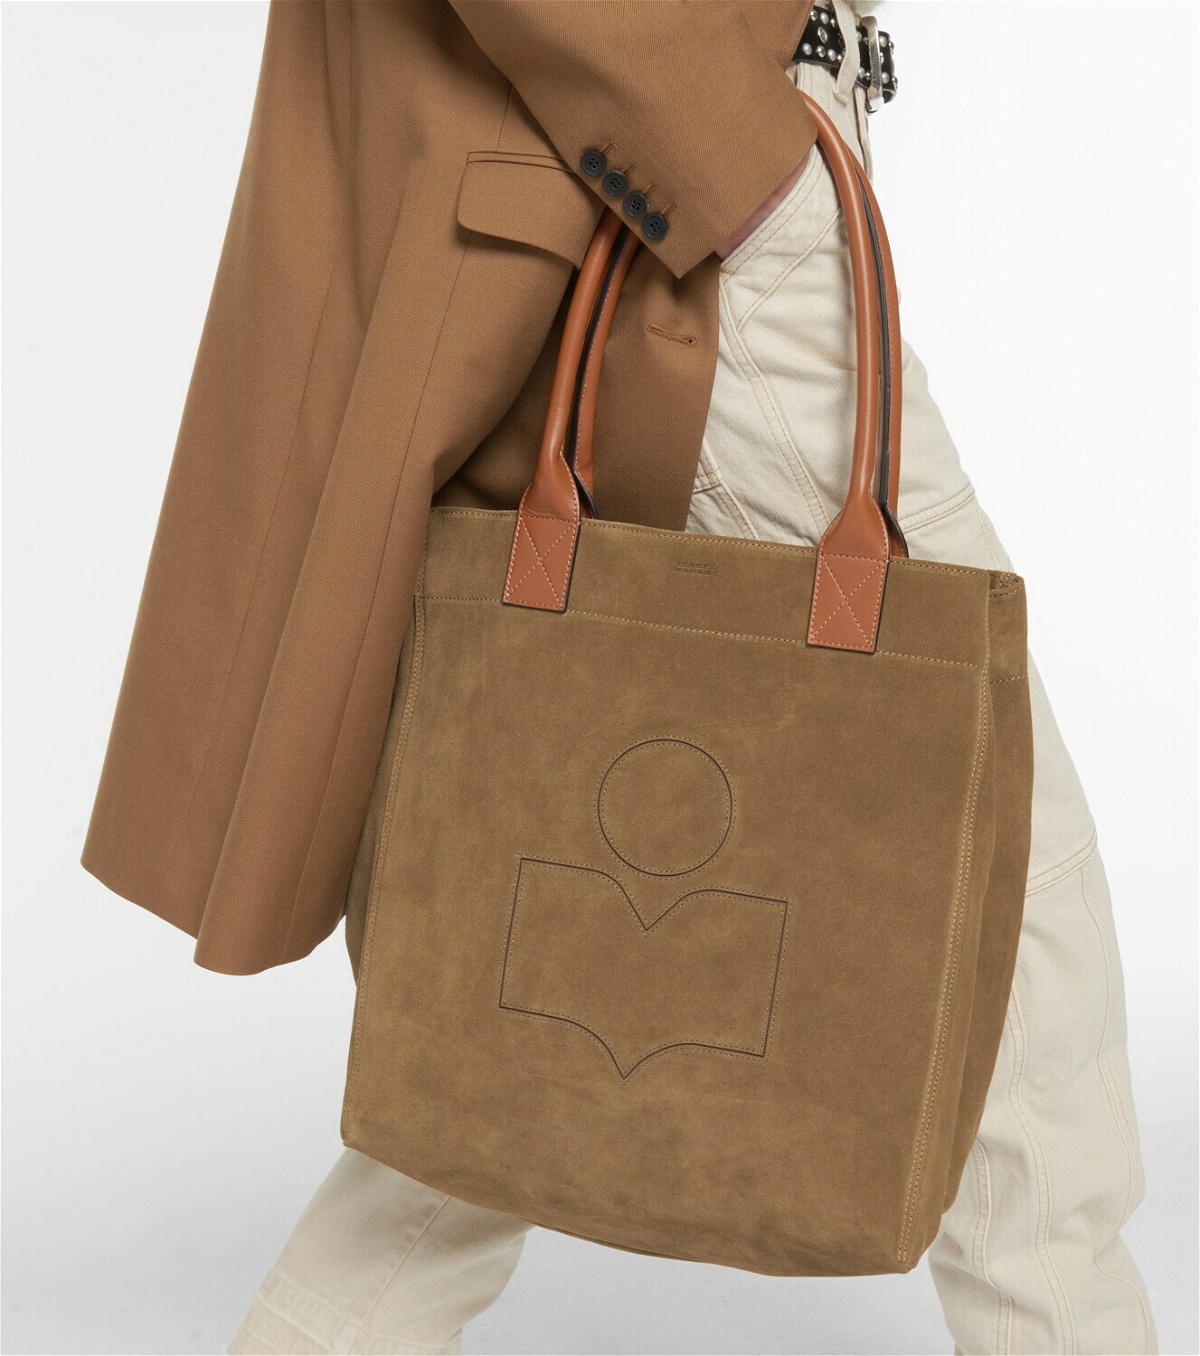 Yenky small leather-trimmed suede tote